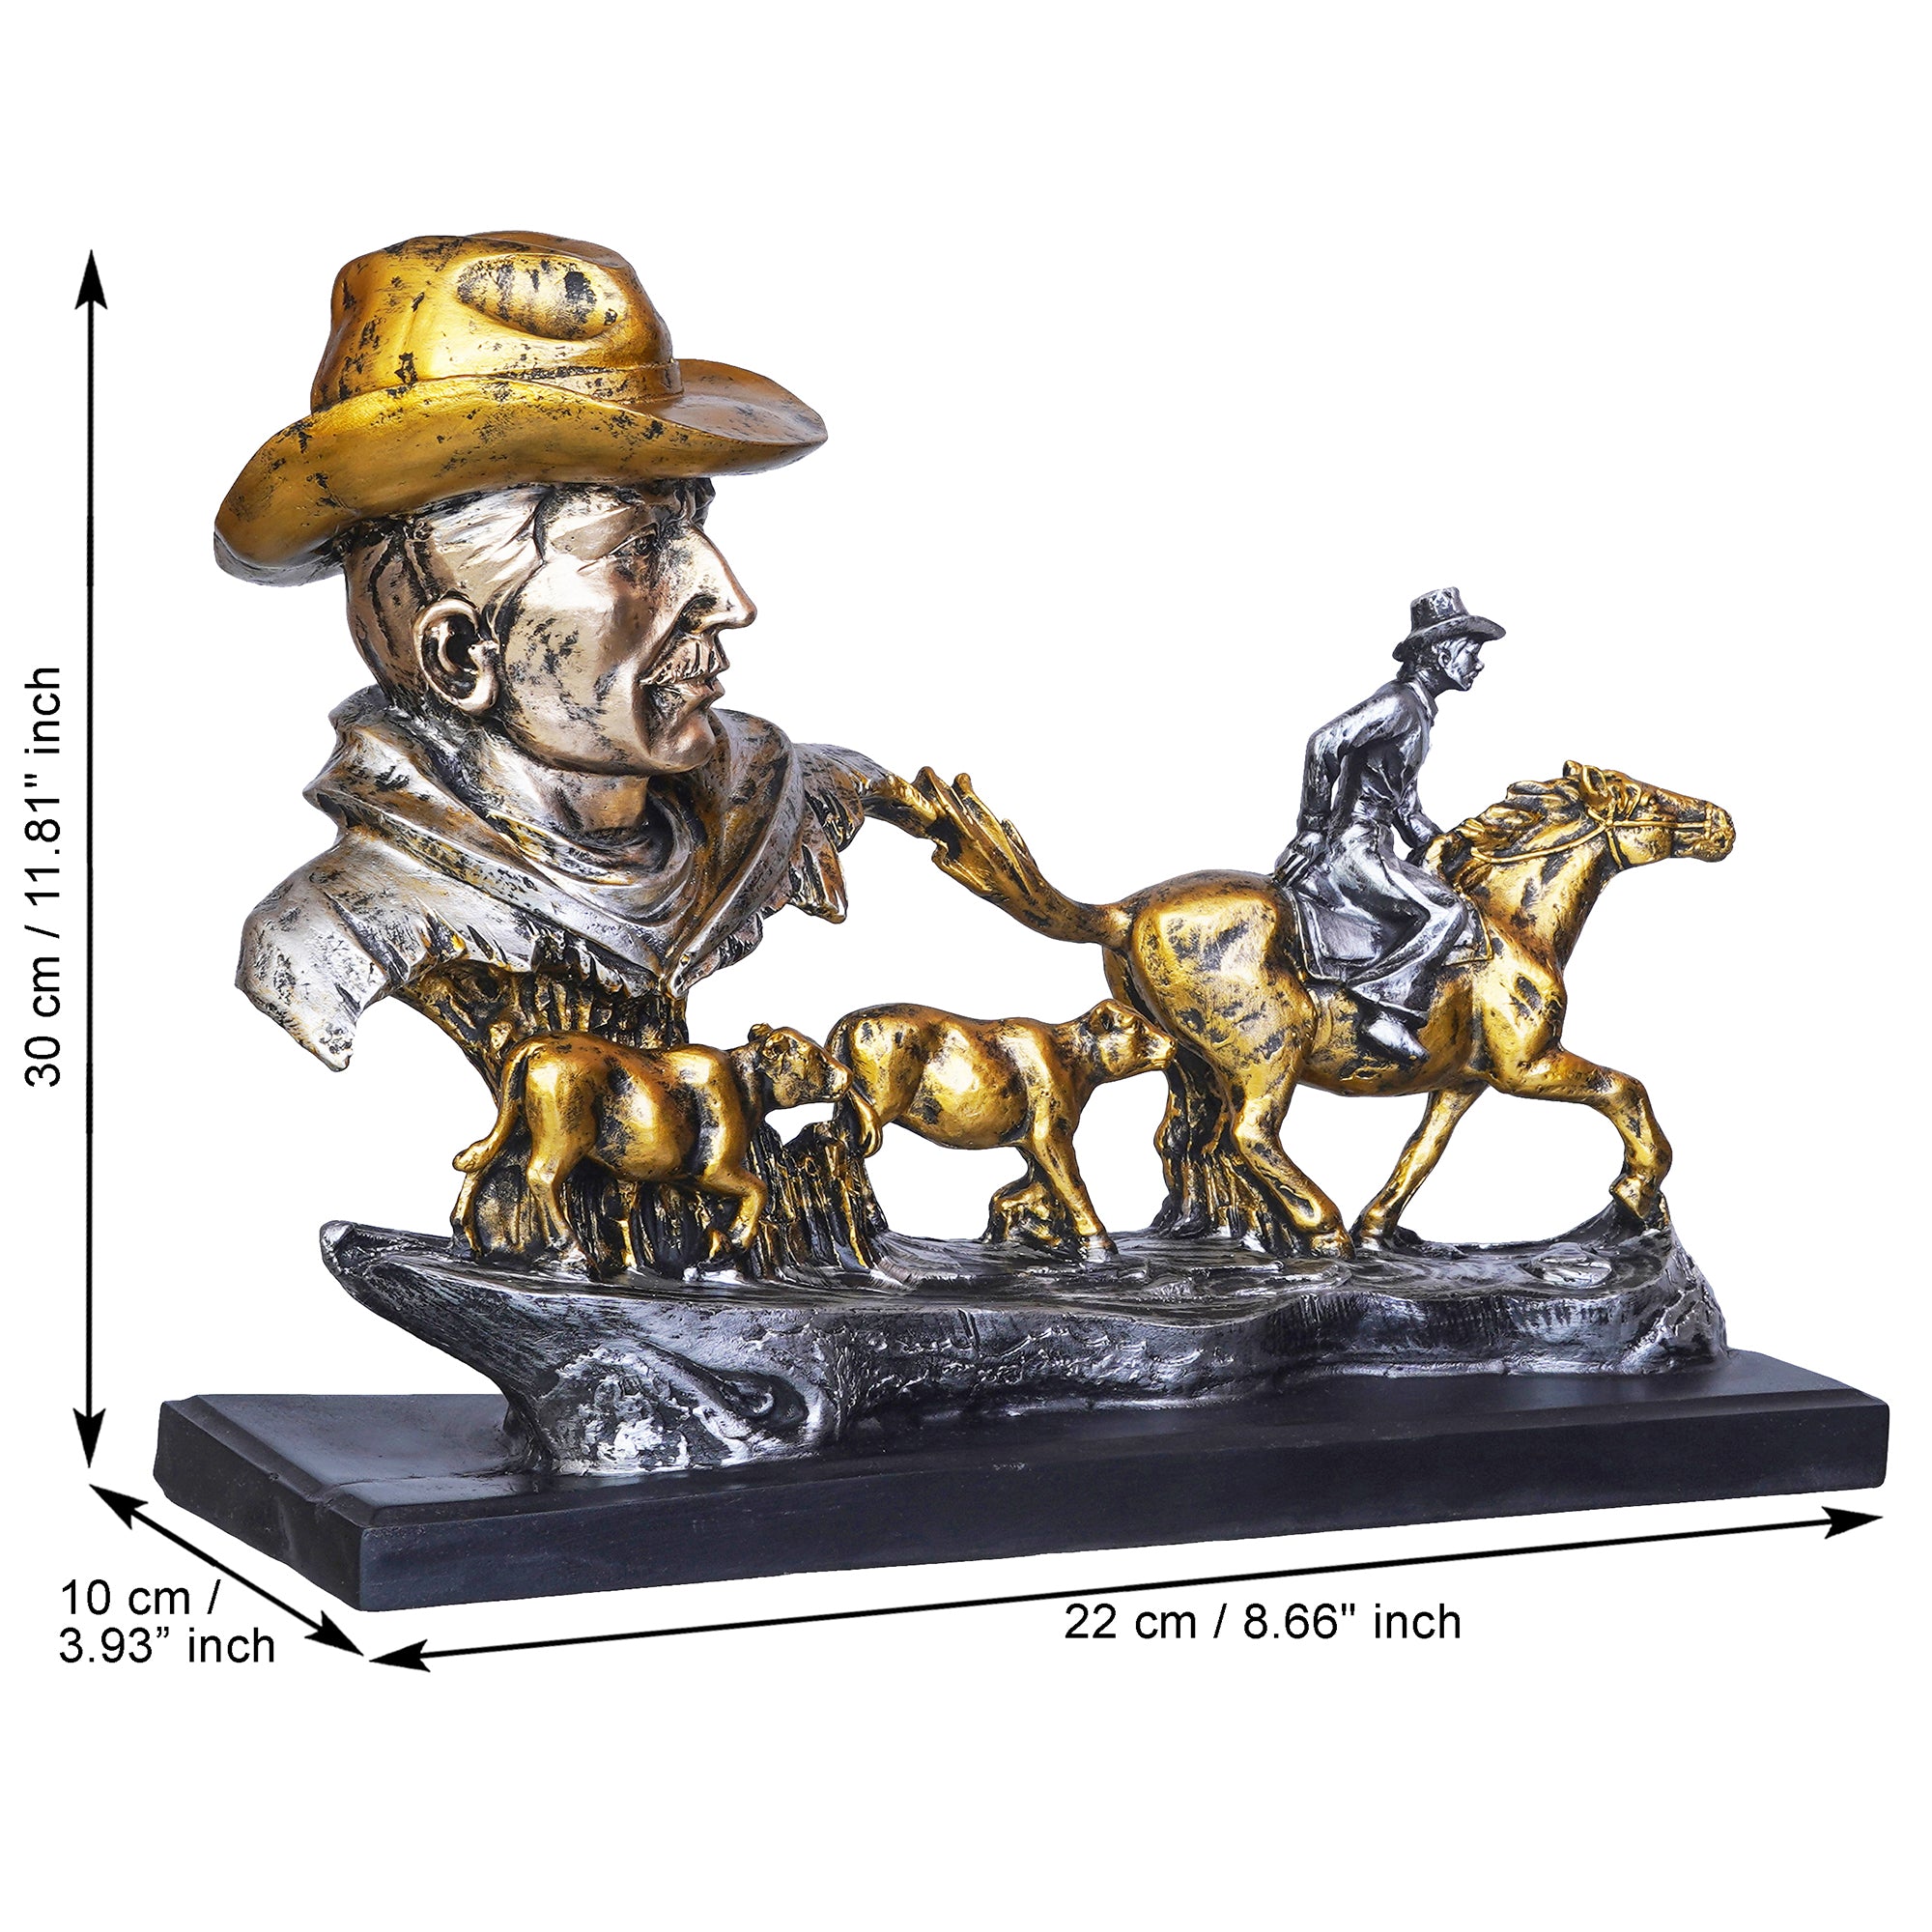 Antique Cowboys Face with Boy Sitting on Running Horse & Cow Statues Decorative Showpiece 3